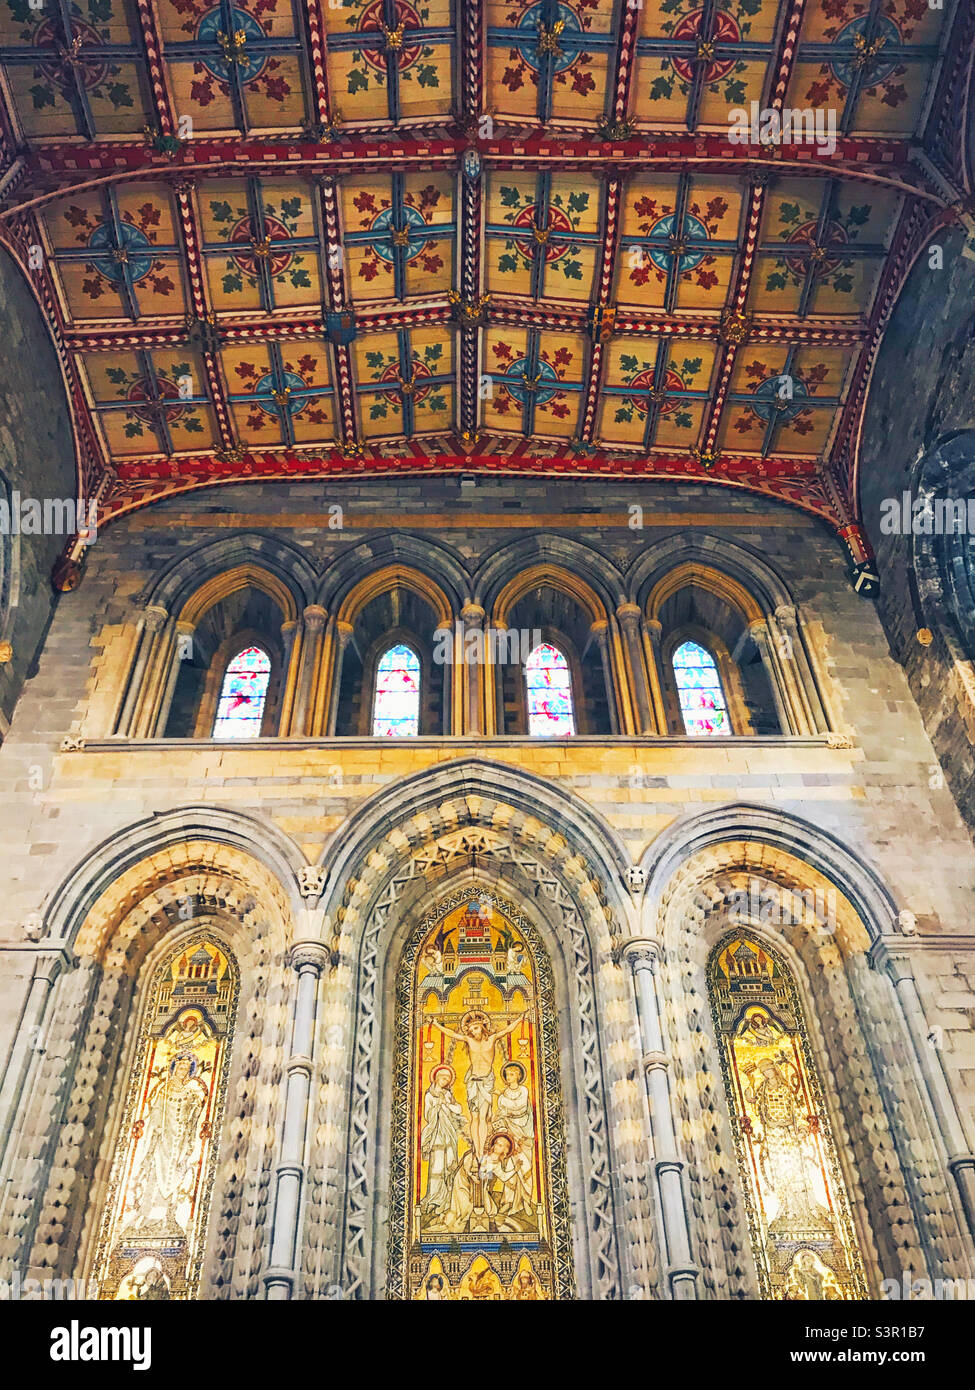 The beautiful interior of St. David’s Cathedral, Pembrokeshire, Wales Stock Photo